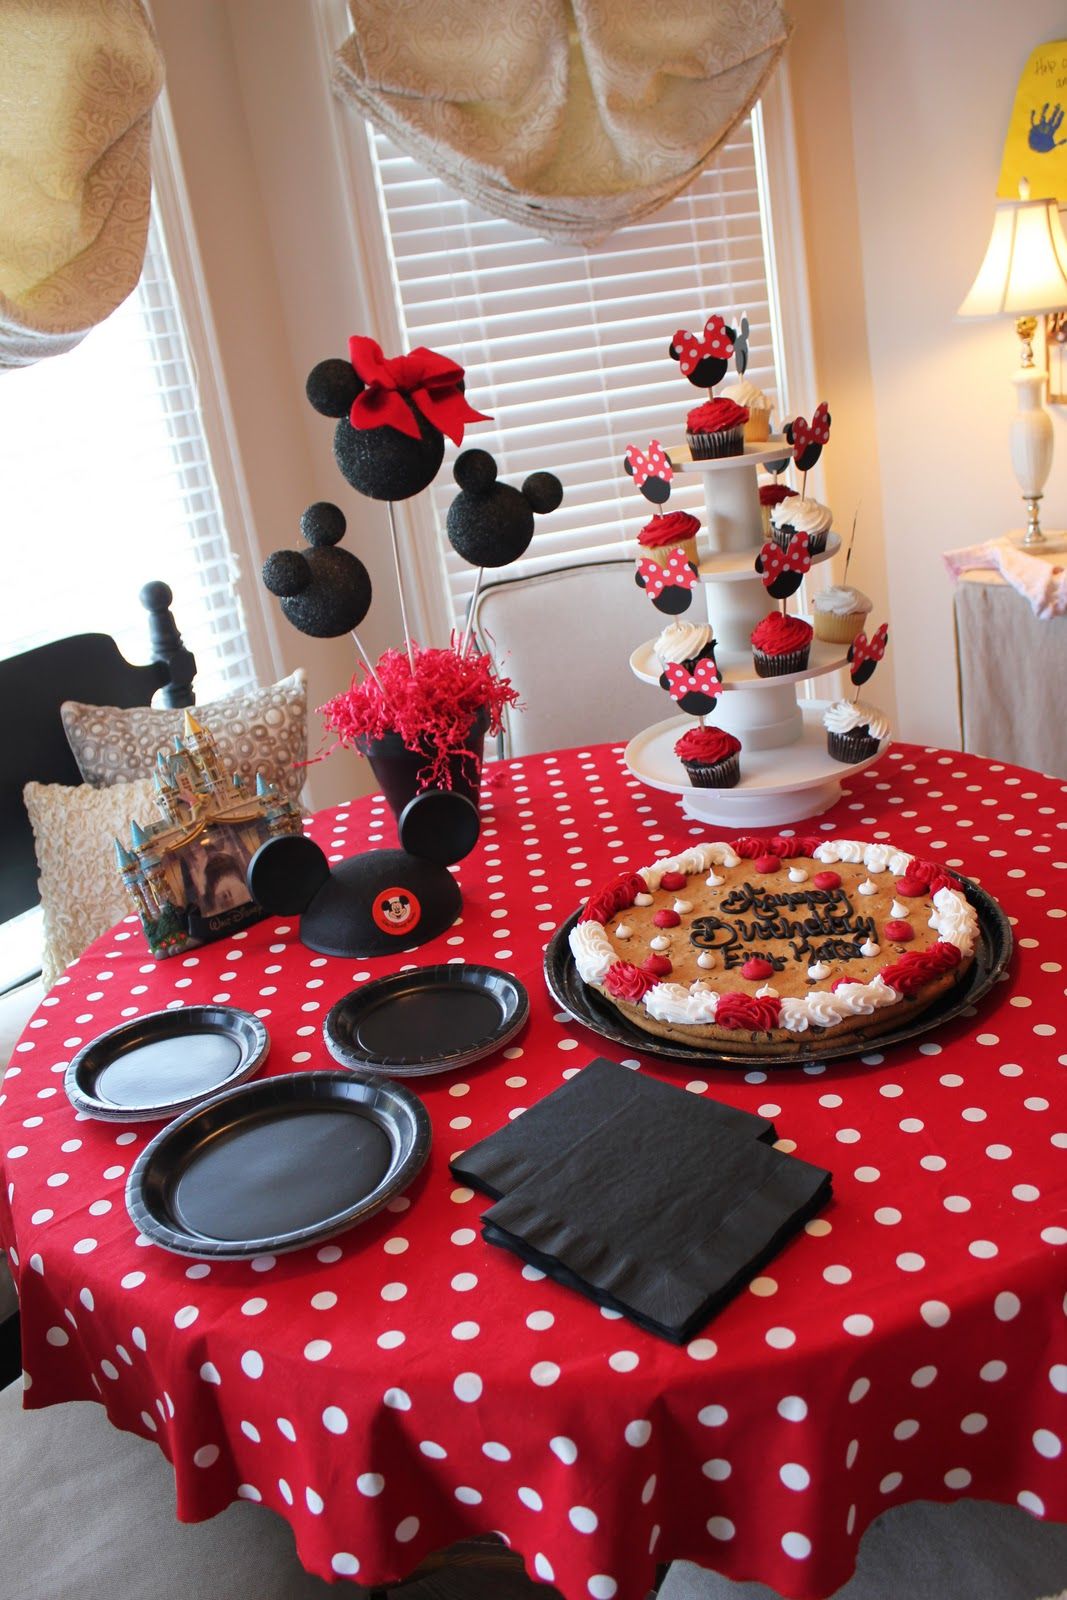 Mickey Mouse party cupcakes and decor!  I love it